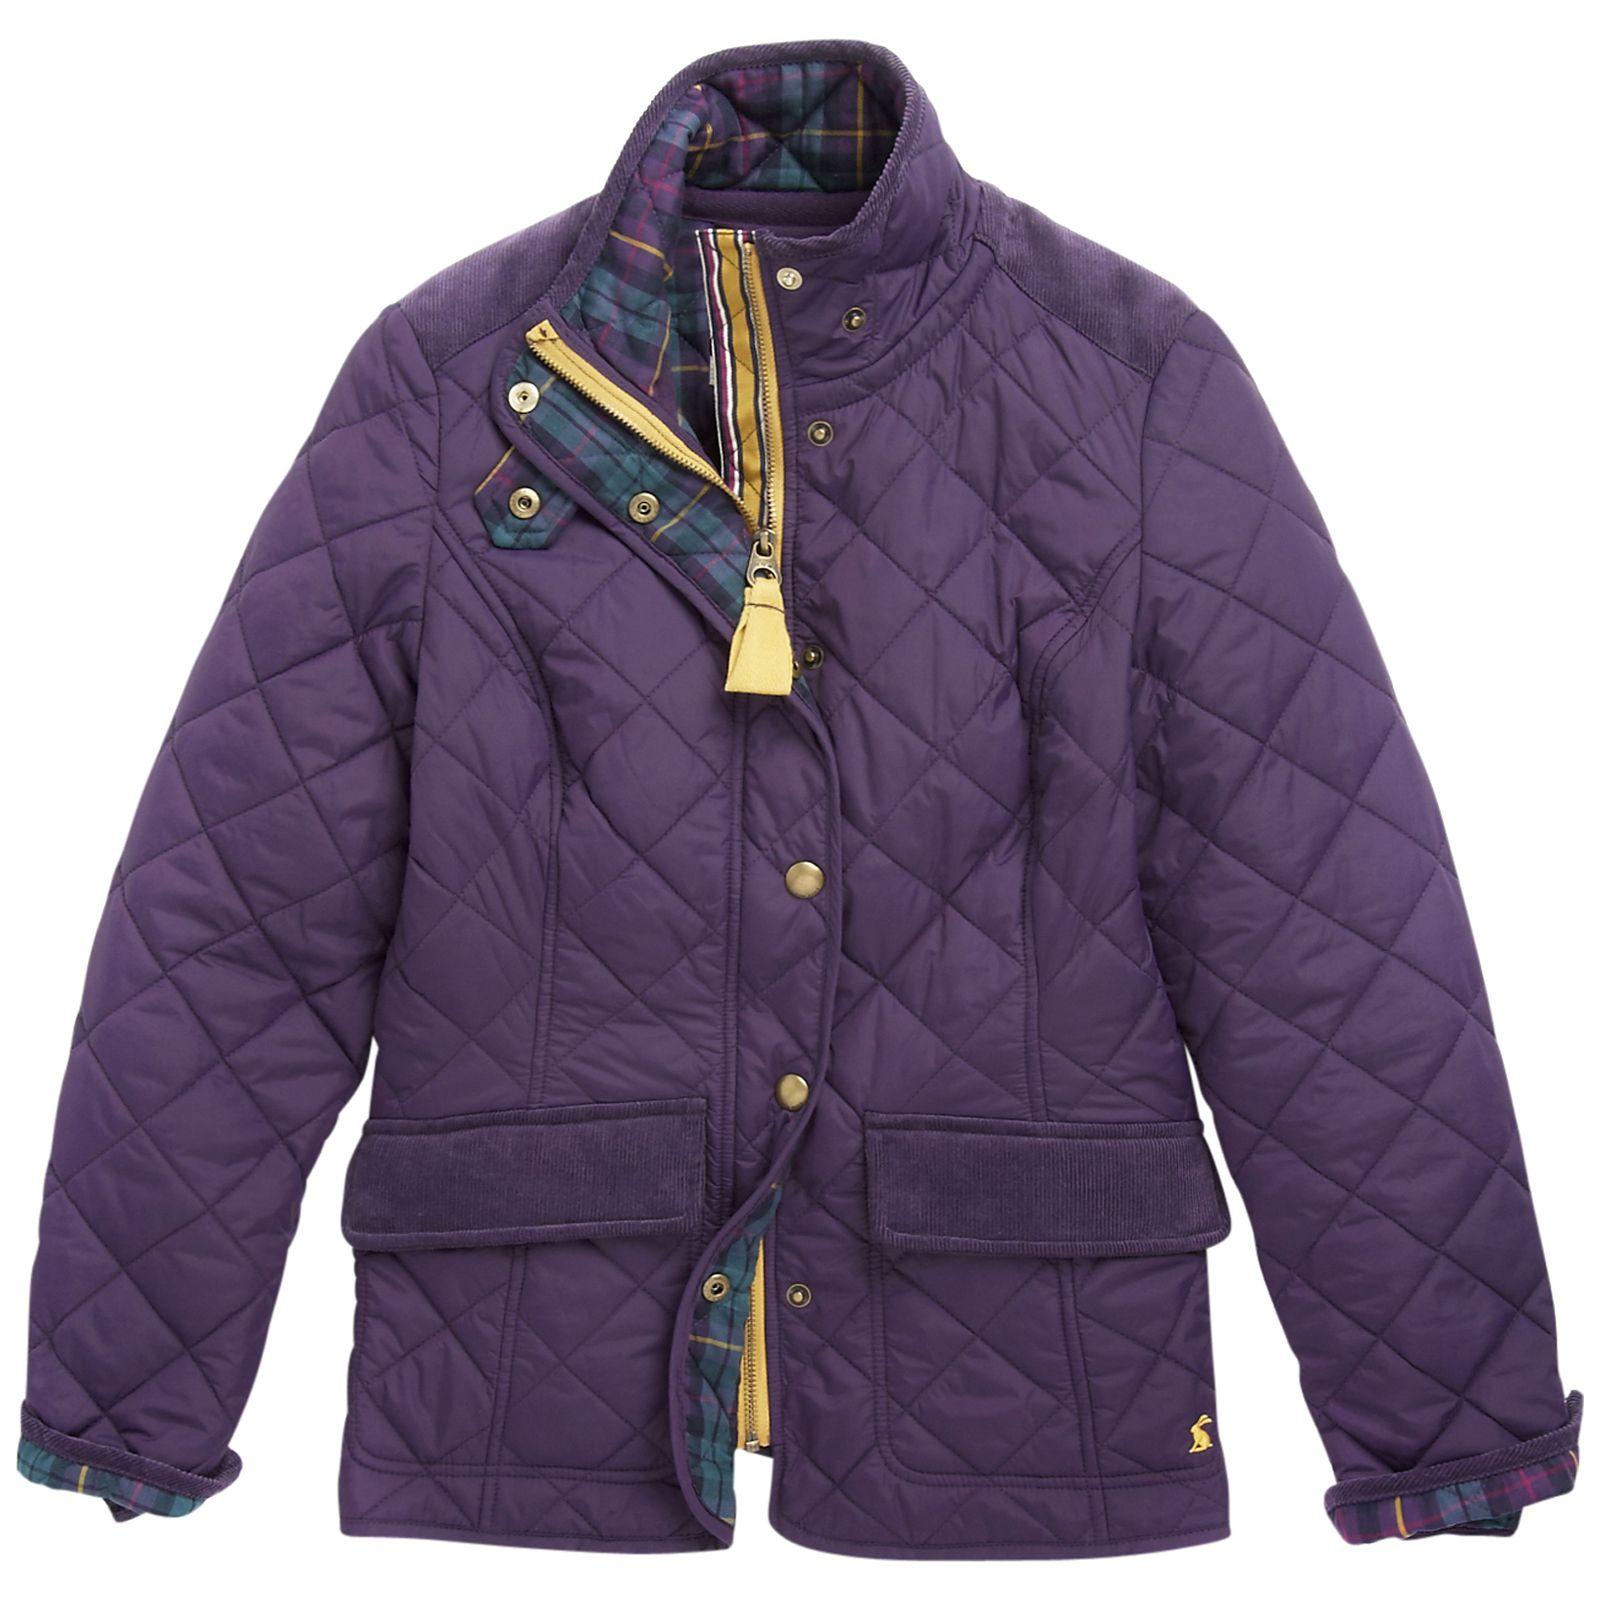 Women's Purple Moredale Quilted Jacket - BrandAlley